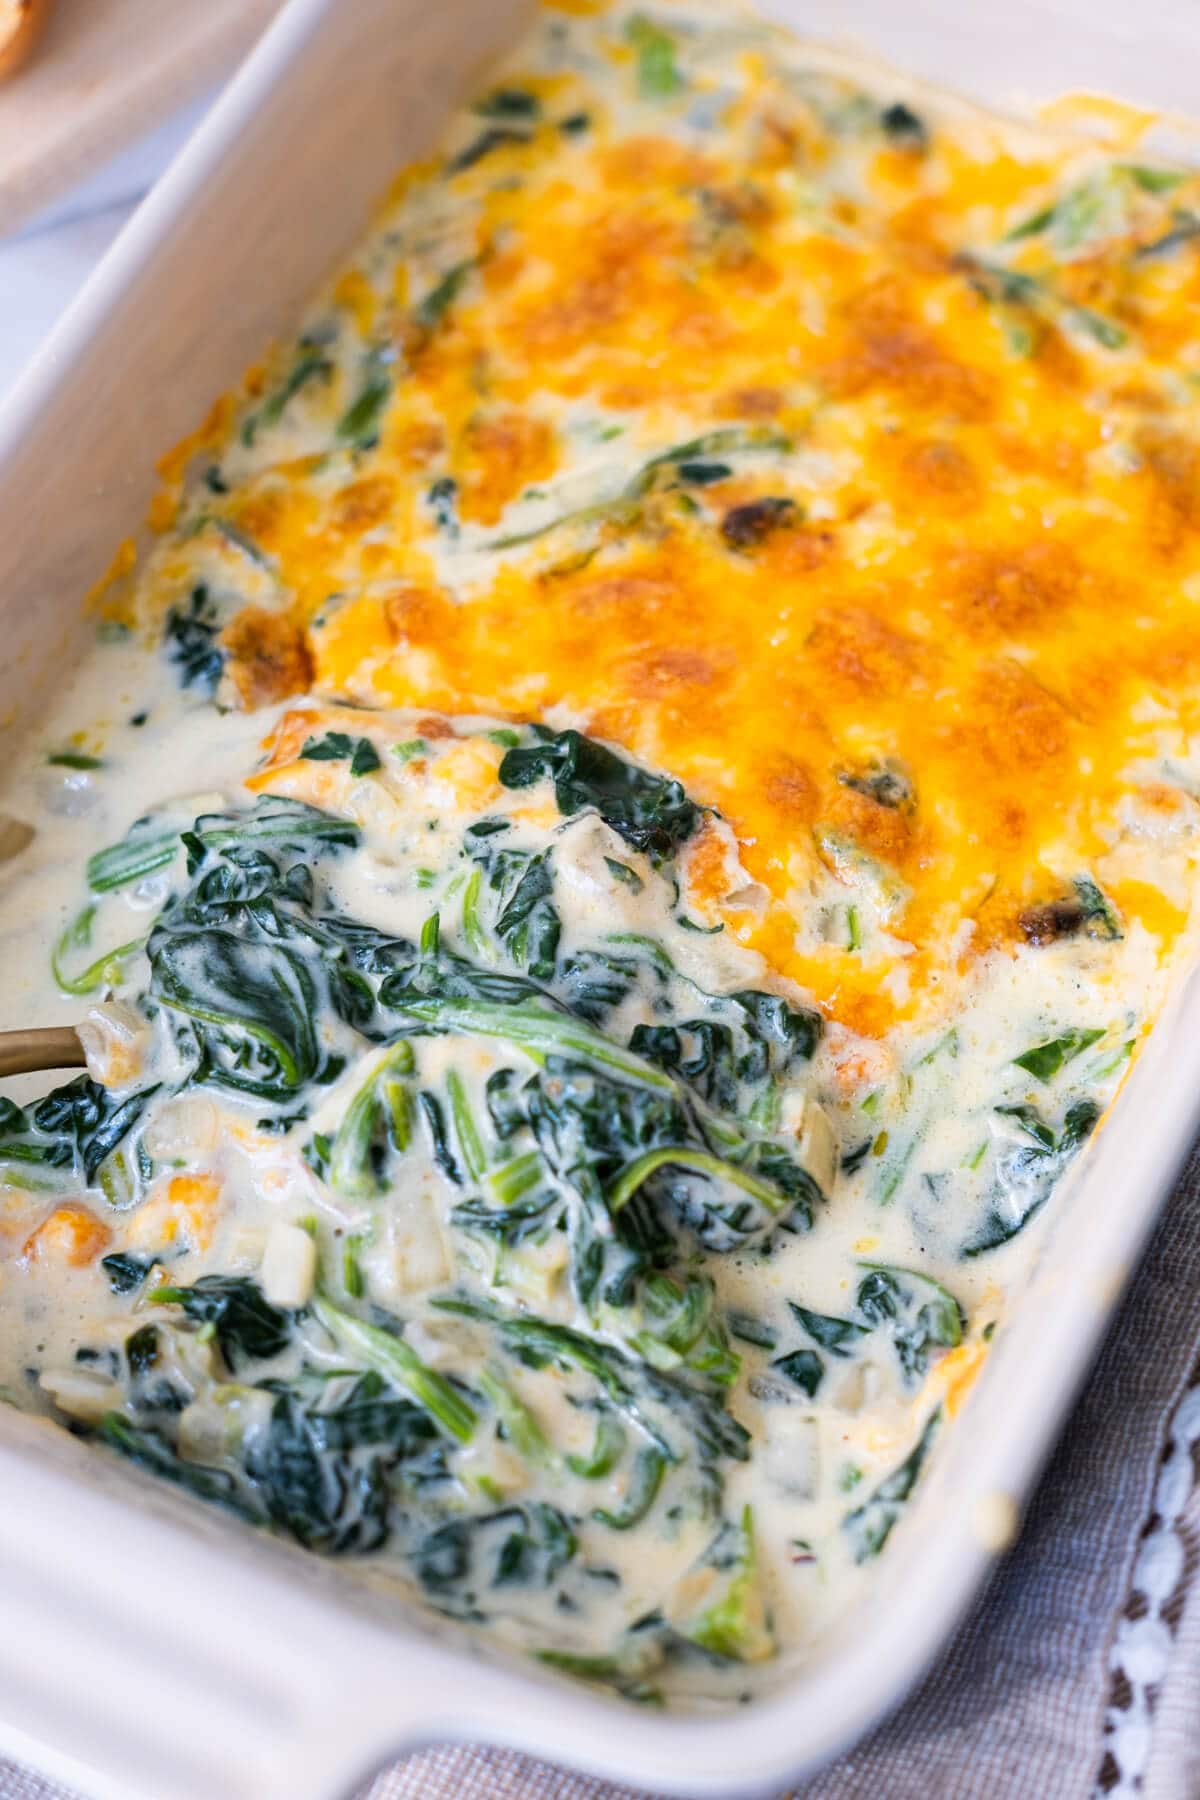 Creamed spinach is half topped with baked cheese in a baking dish with a kitchen towel under it.